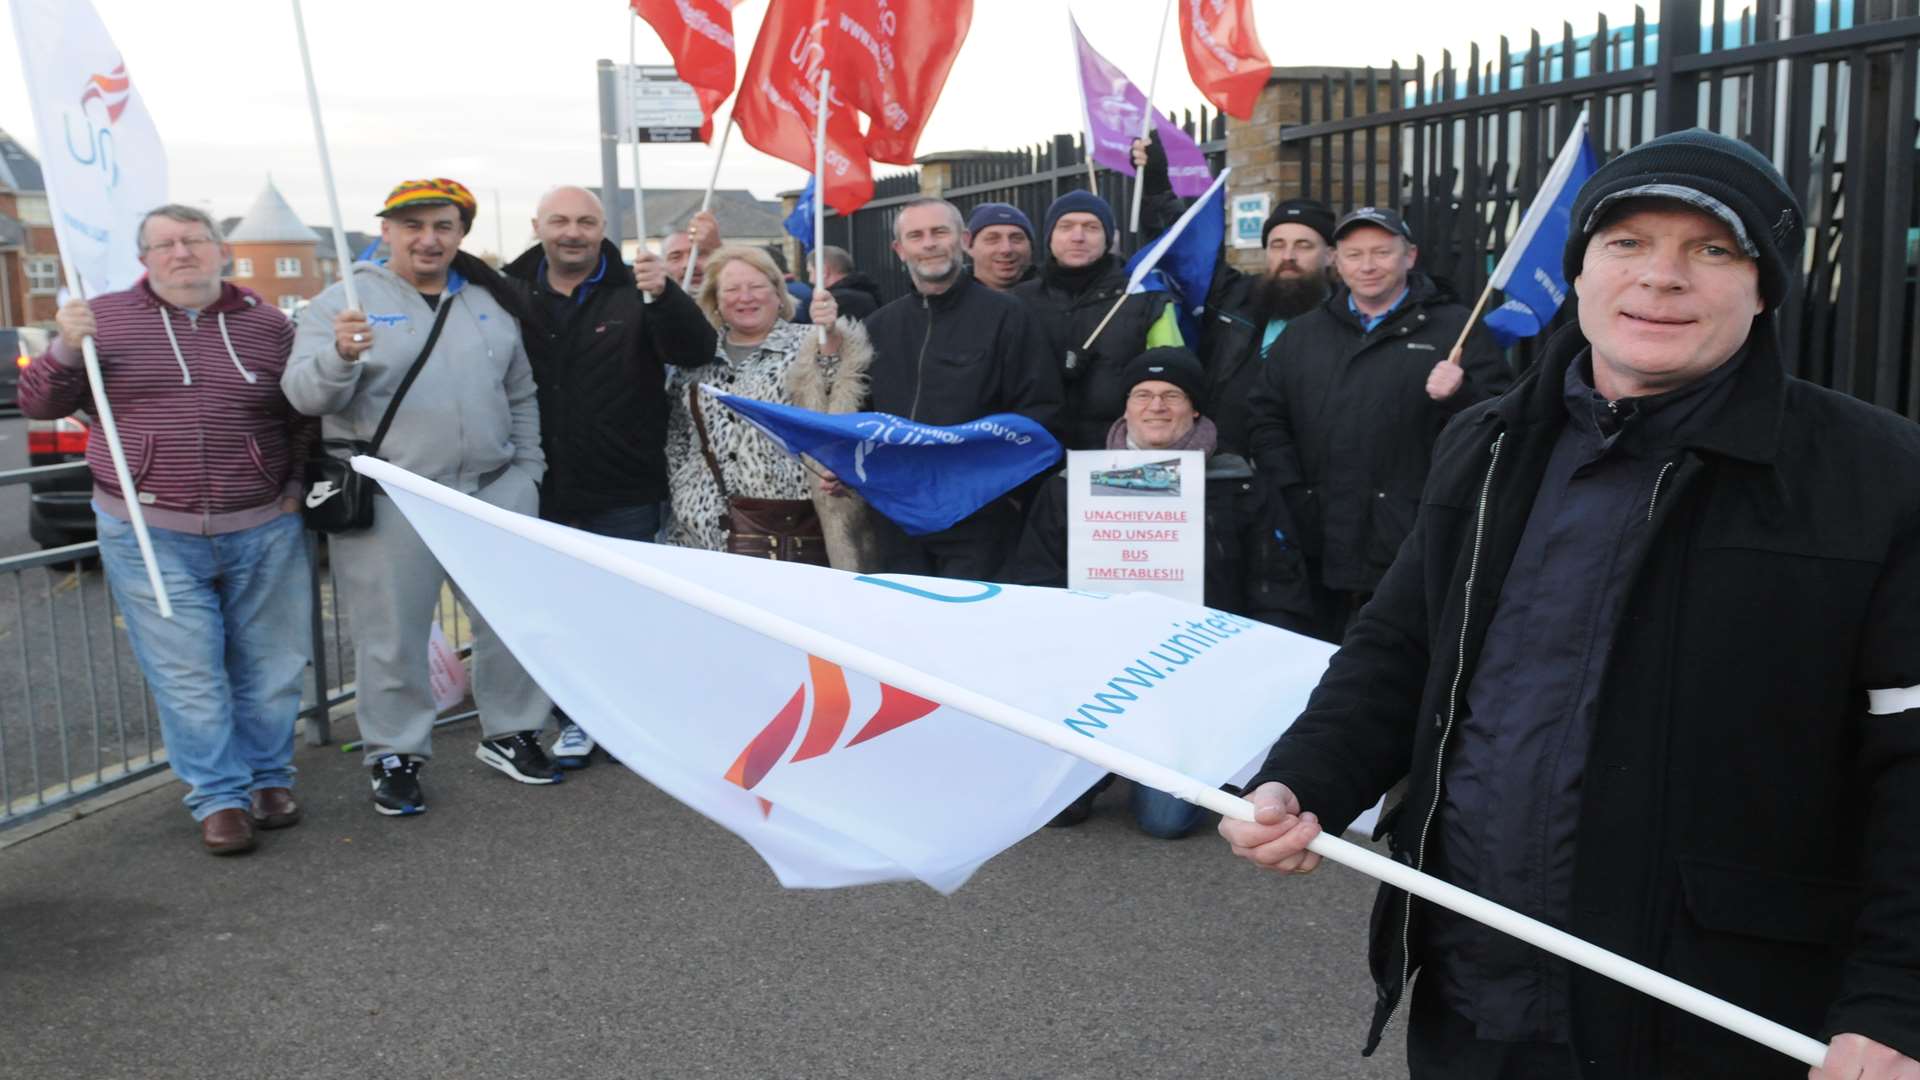 Tony Teed, shop steward, with other drivers on the picket line. Picture: Steve Crispe.